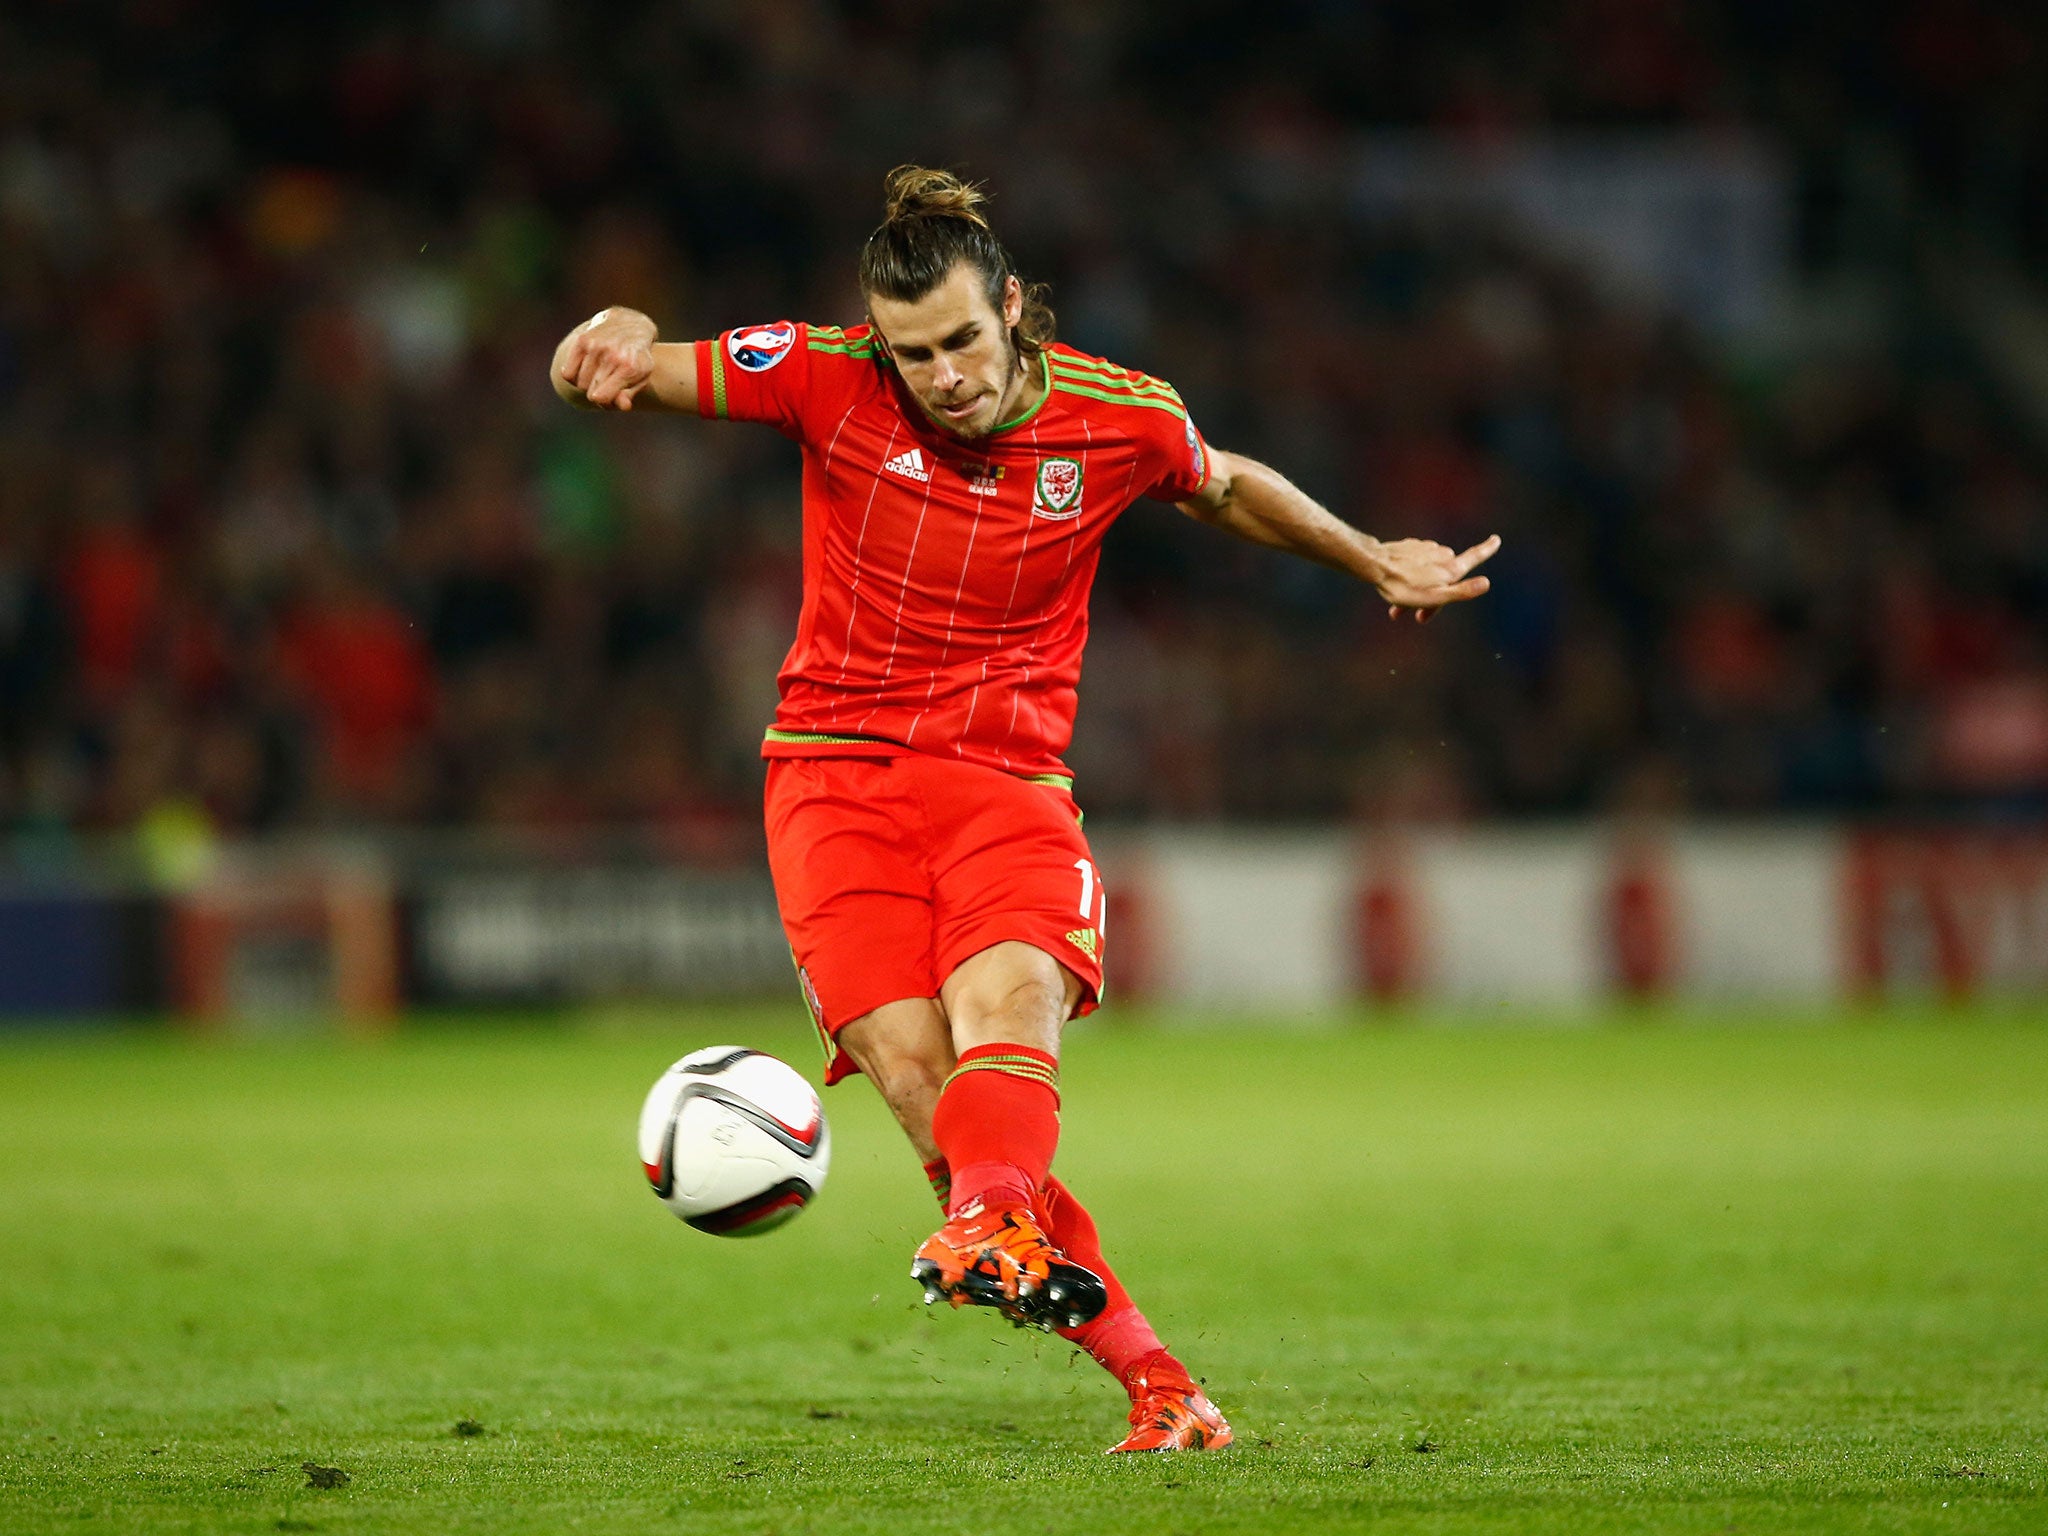 Gareth Bale in action for Wales